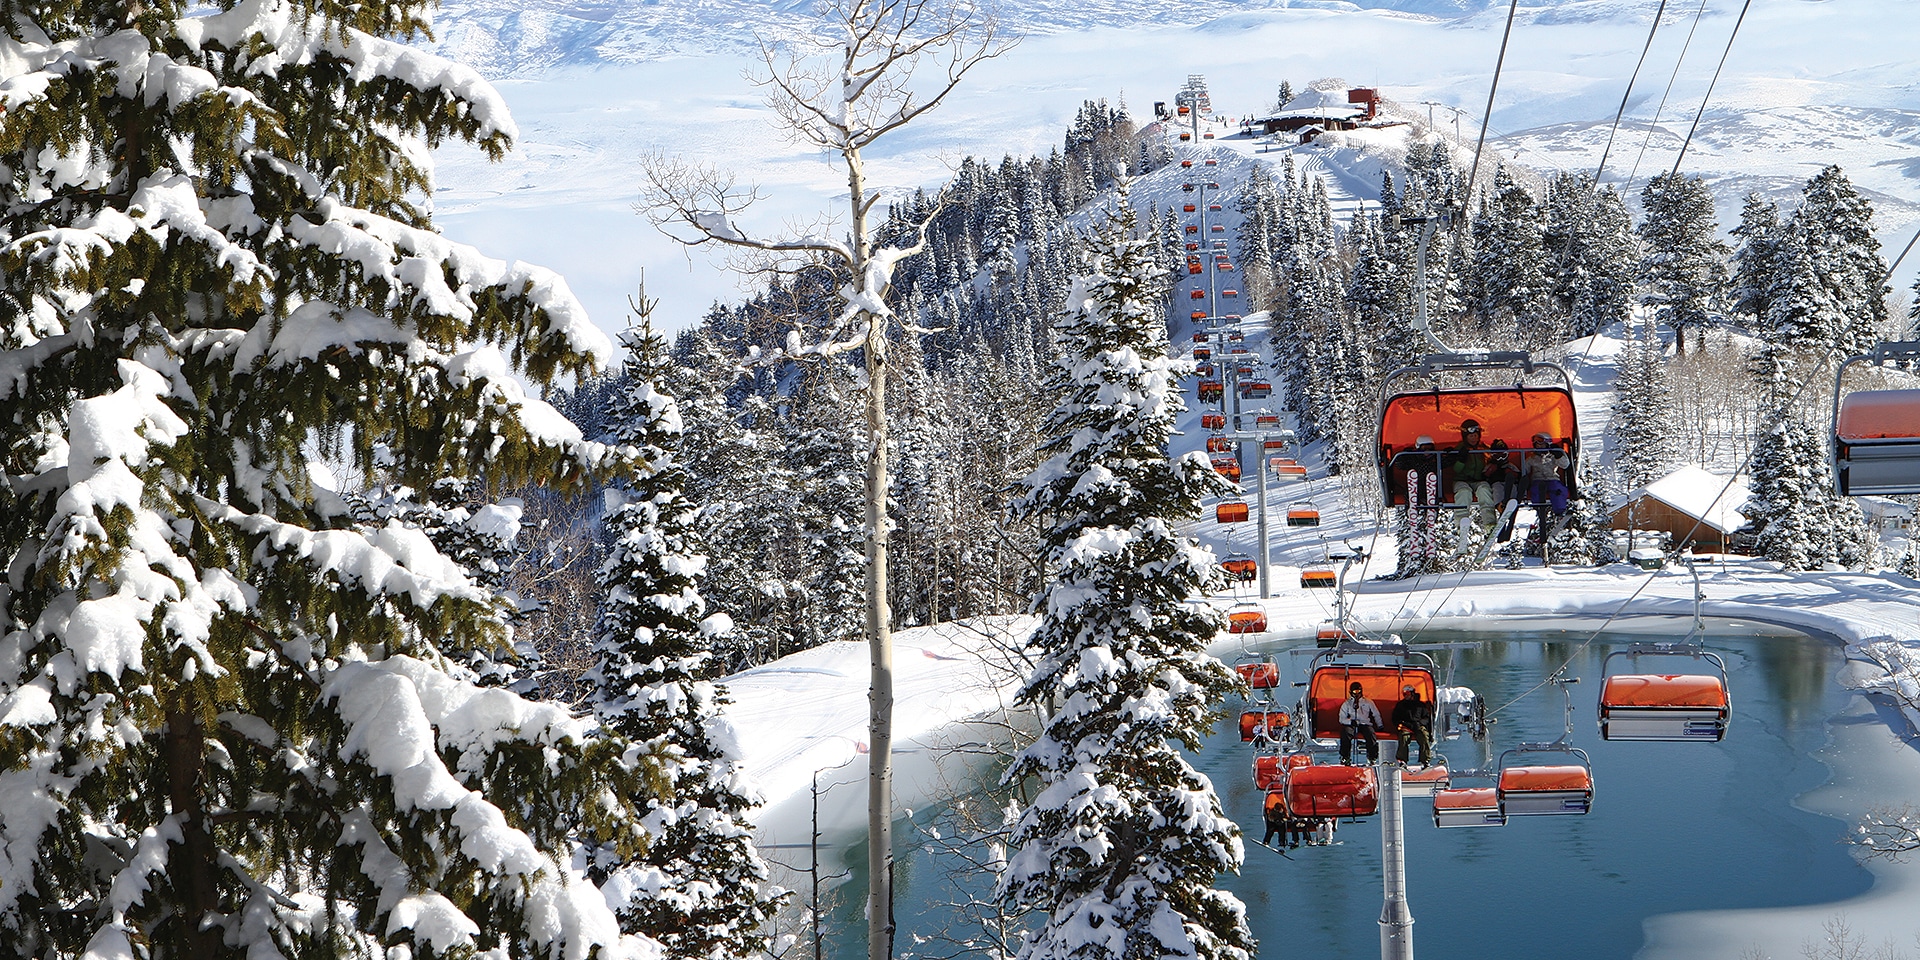 Mountain Ready? Here’s How to Spend 72 Unforgettable Hours in Park City